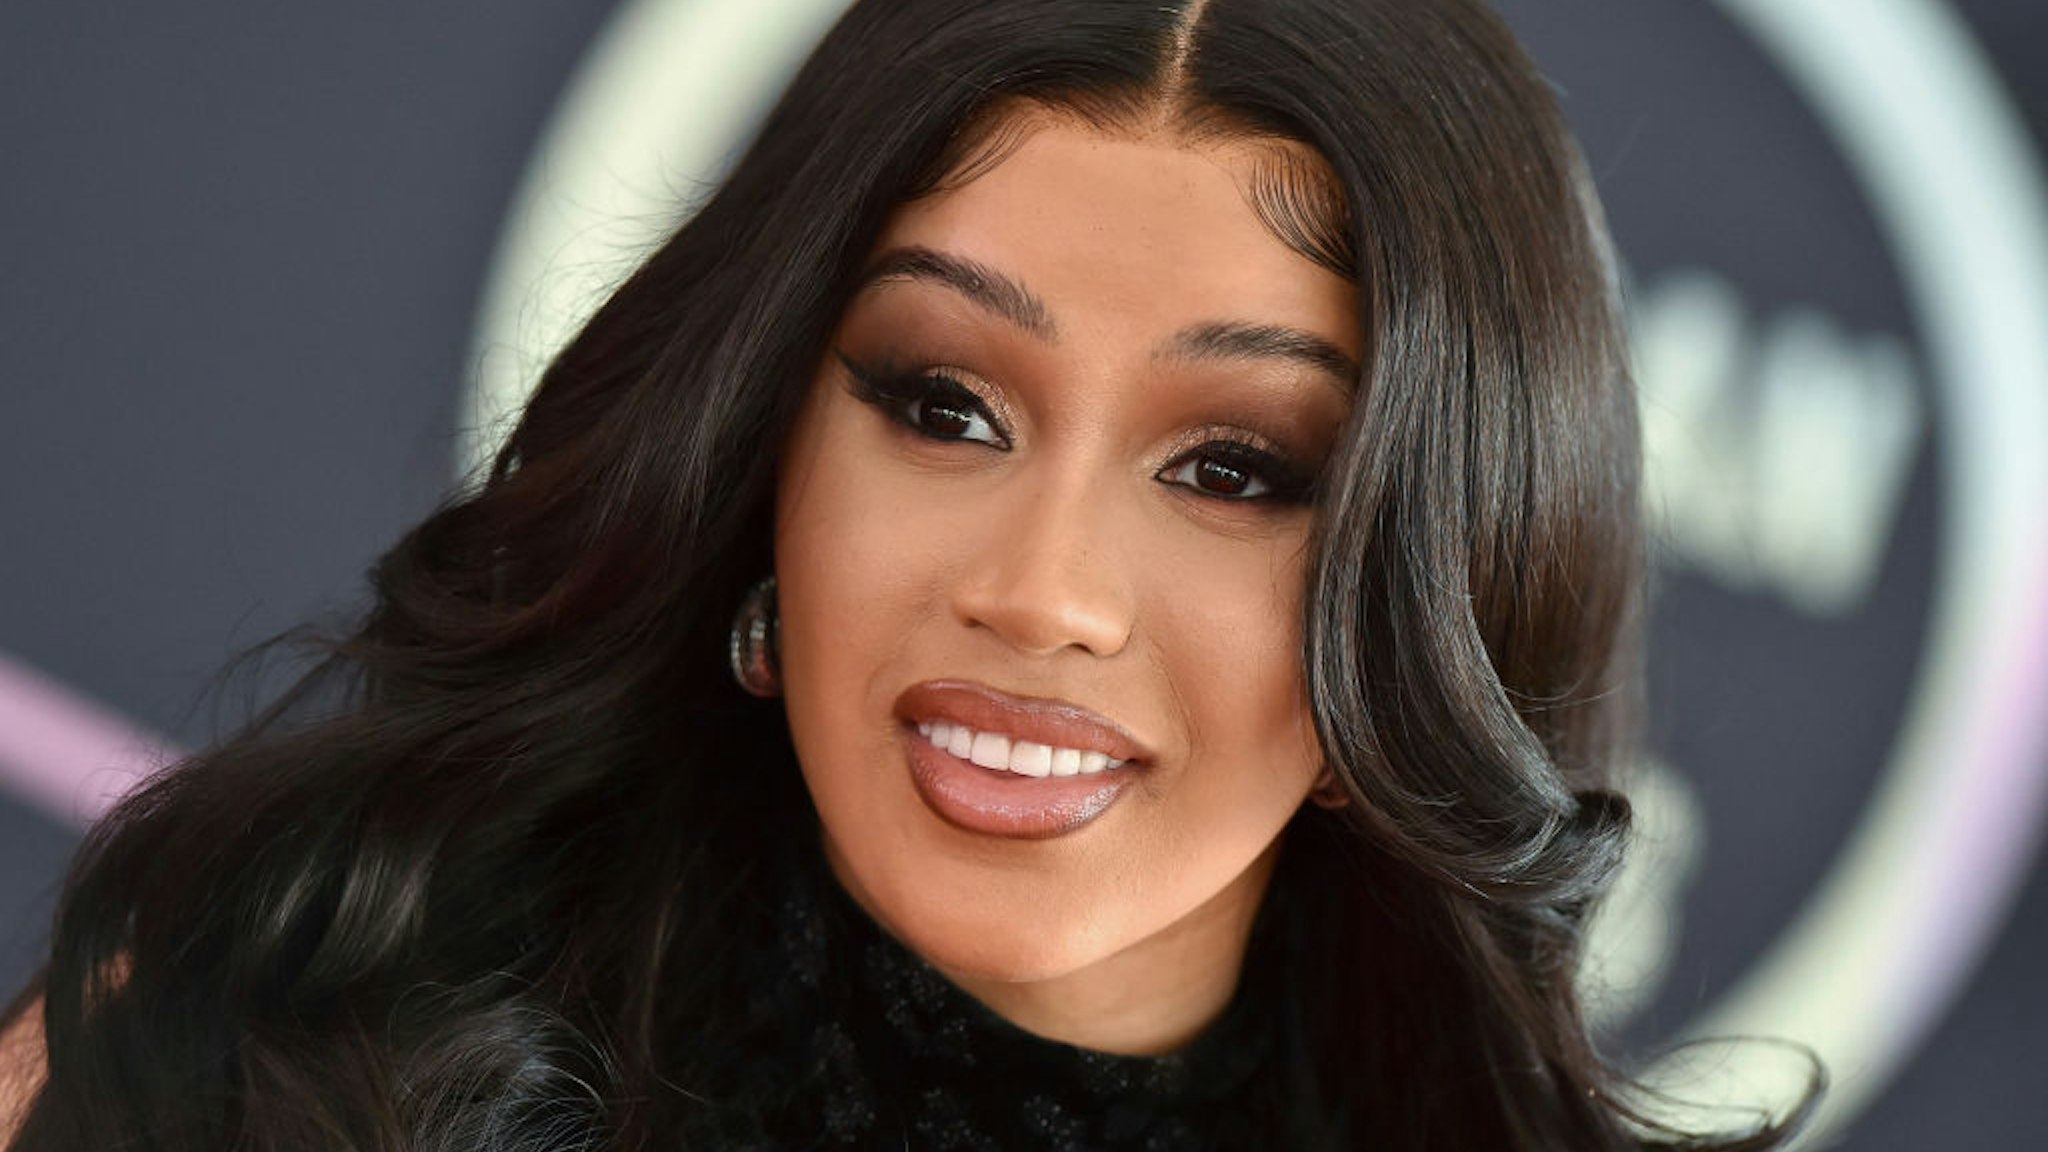 LOS ANGELES, CALIFORNIA - NOVEMBER 19: Cardi B attends the 2021 American Music Awards Red Carpet Roll-Out with host Cardi B at L.A. LIVE on November 19, 2021 in Los Angeles, California. (Photo by Axelle/Bauer-Griffin/FilmMagic)